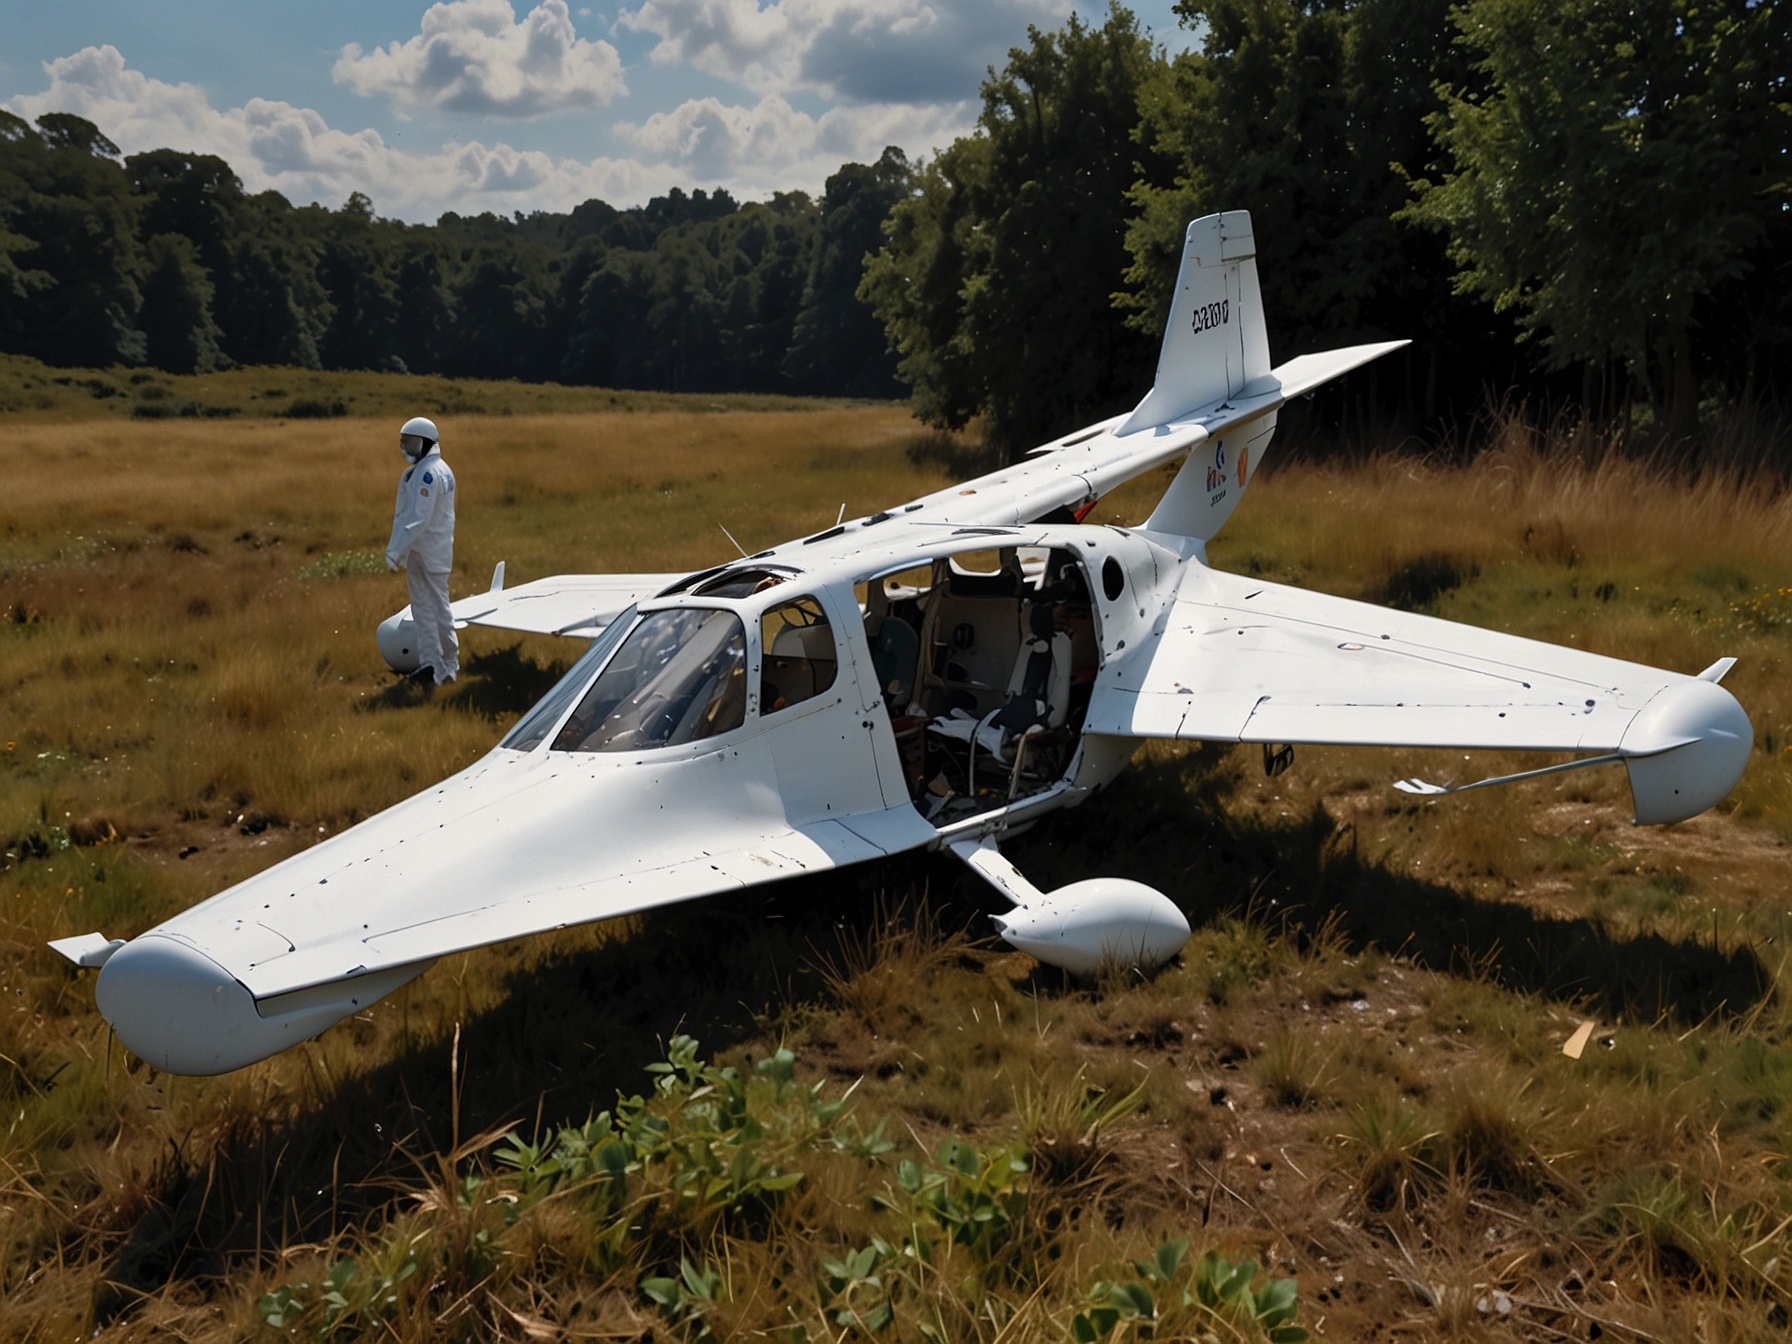 A close-up of the wreckage of the Tecnam P2006T aircraft, with investigators examining the site for clues. The scene is cordoned off, ensuring safety during the investigation.